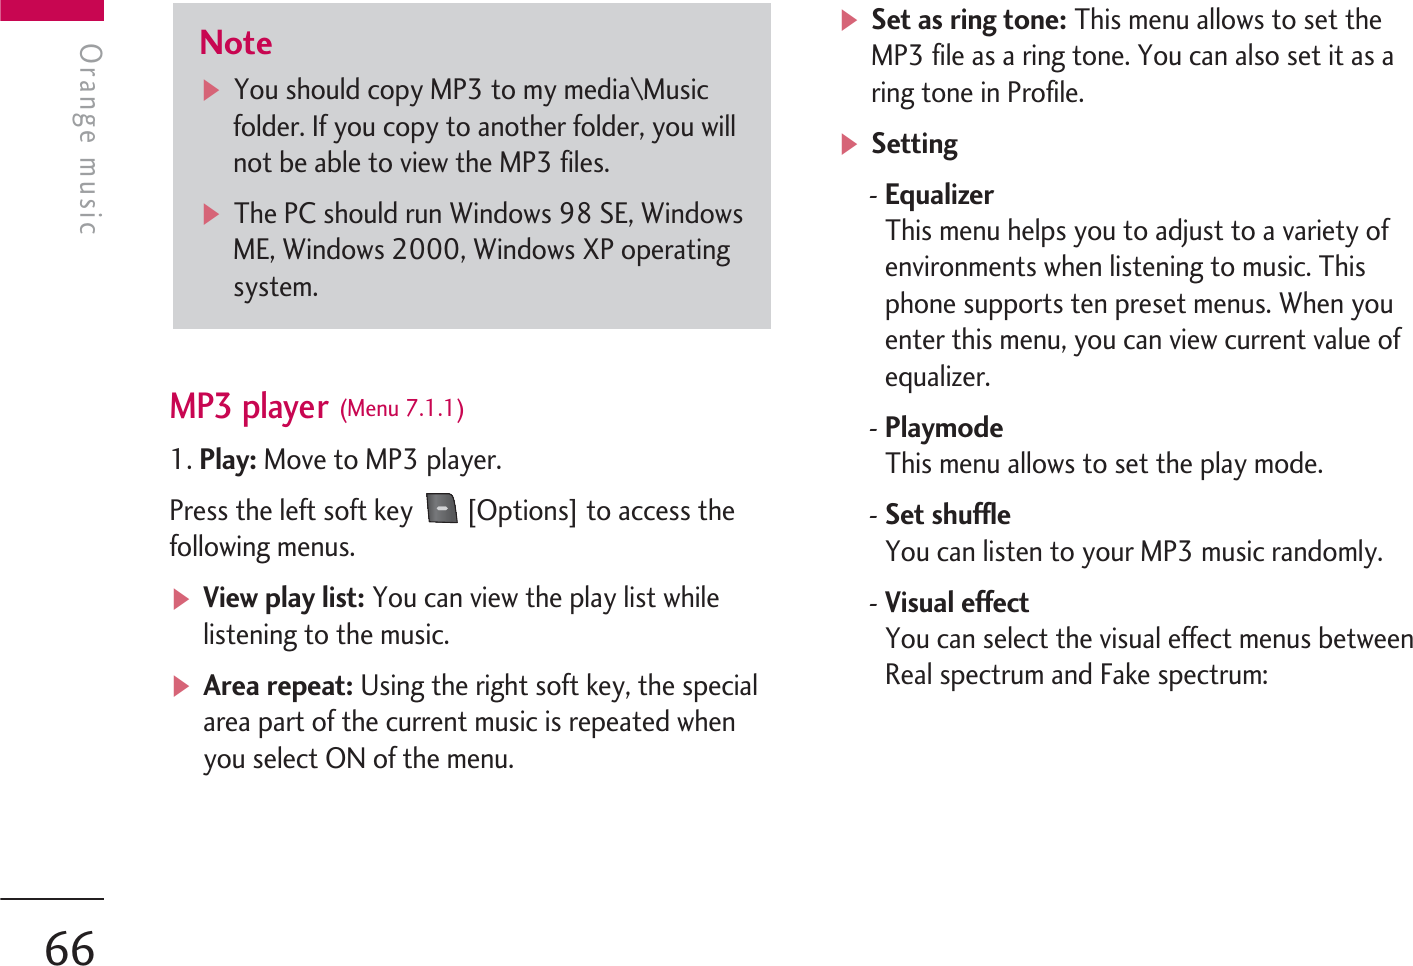 MP3 player (Menu 7.1.1)1. Play: Move to MP3 player.Press the left soft key  [Options] to access thefollowing menus.vView play list: You can view the play list whilelistening to the music.vArea repeat: Using the right soft key, the specialarea part of the current music is repeated whenyou select ON of the menu.vSet as ring tone: This menu allows to set theMP3 file as a ring tone. You can also set it as aring tone in Profile.vSetting- EqualizerThis menu helps you to adjust to a variety ofenvironments when listening to music. Thisphone supports ten preset menus. When youenter this menu, you can view current value ofequalizer.- PlaymodeThis menu allows to set the play mode.- Set shuffleYou can listen to your MP3 music randomly.-Visual effect You can select the visual effect menus betweenReal spectrum and Fake spectrum:NotevYou should copy MP3 to my media\Musicfolder. If you copy to another folder, you willnot be able to view the MP3 files.vThe PC should run Windows 98 SE, WindowsME, Windows 2000, Windows XP operatingsystem.Orange musicOrange music66